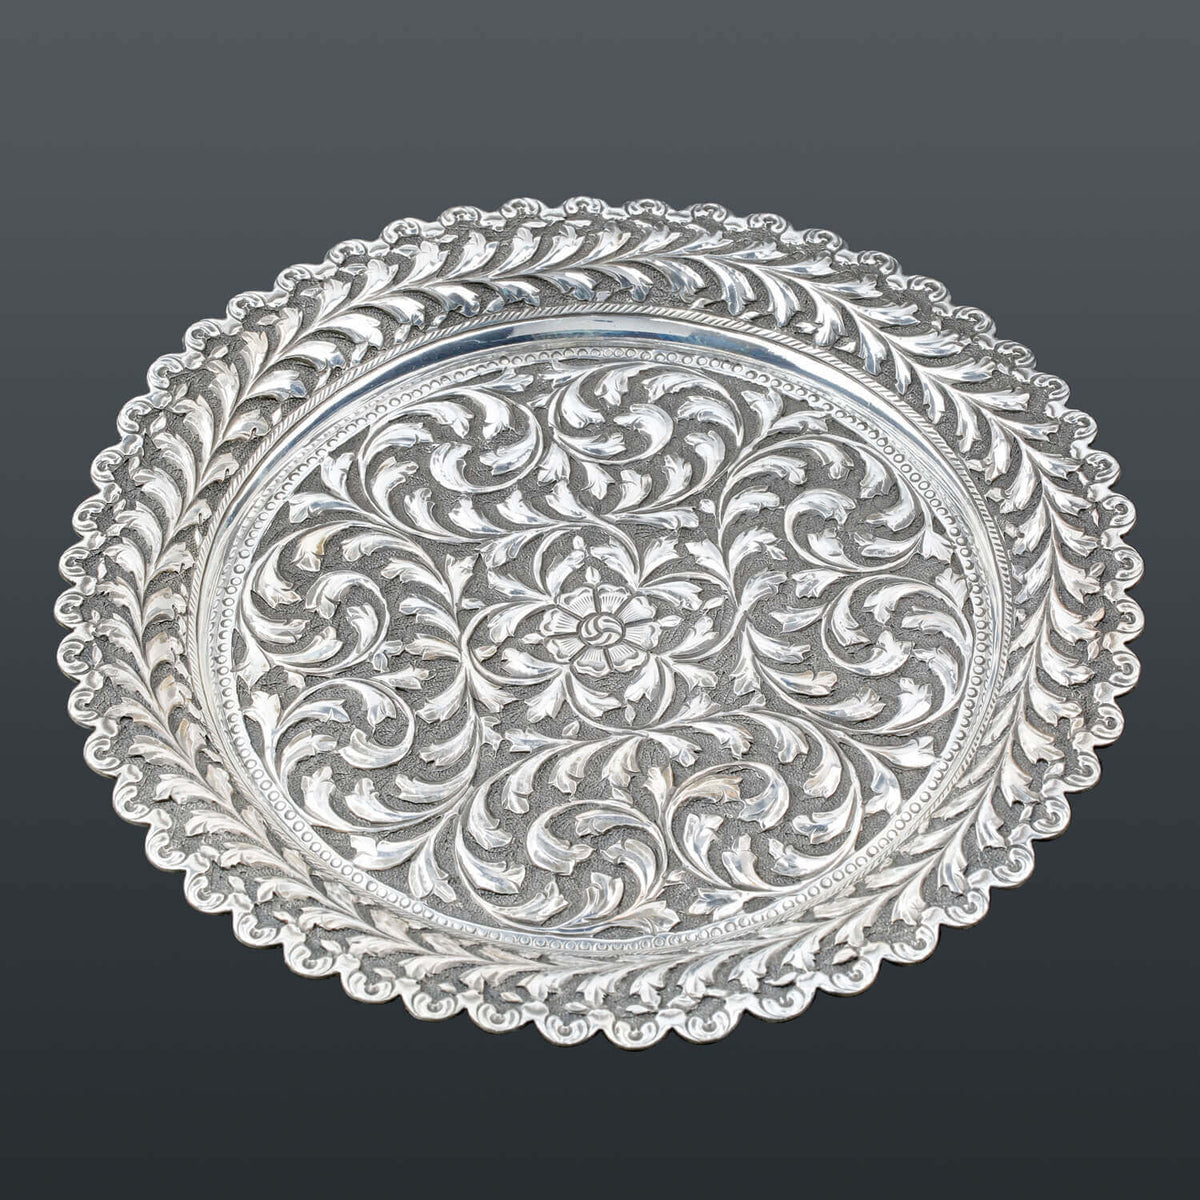 silver plates, sterling silver plates, floral plates, decor, decoration, tableware, handmade, handcrafted, Festival, Showpiece, Gifts, Gifting,, scrollwork